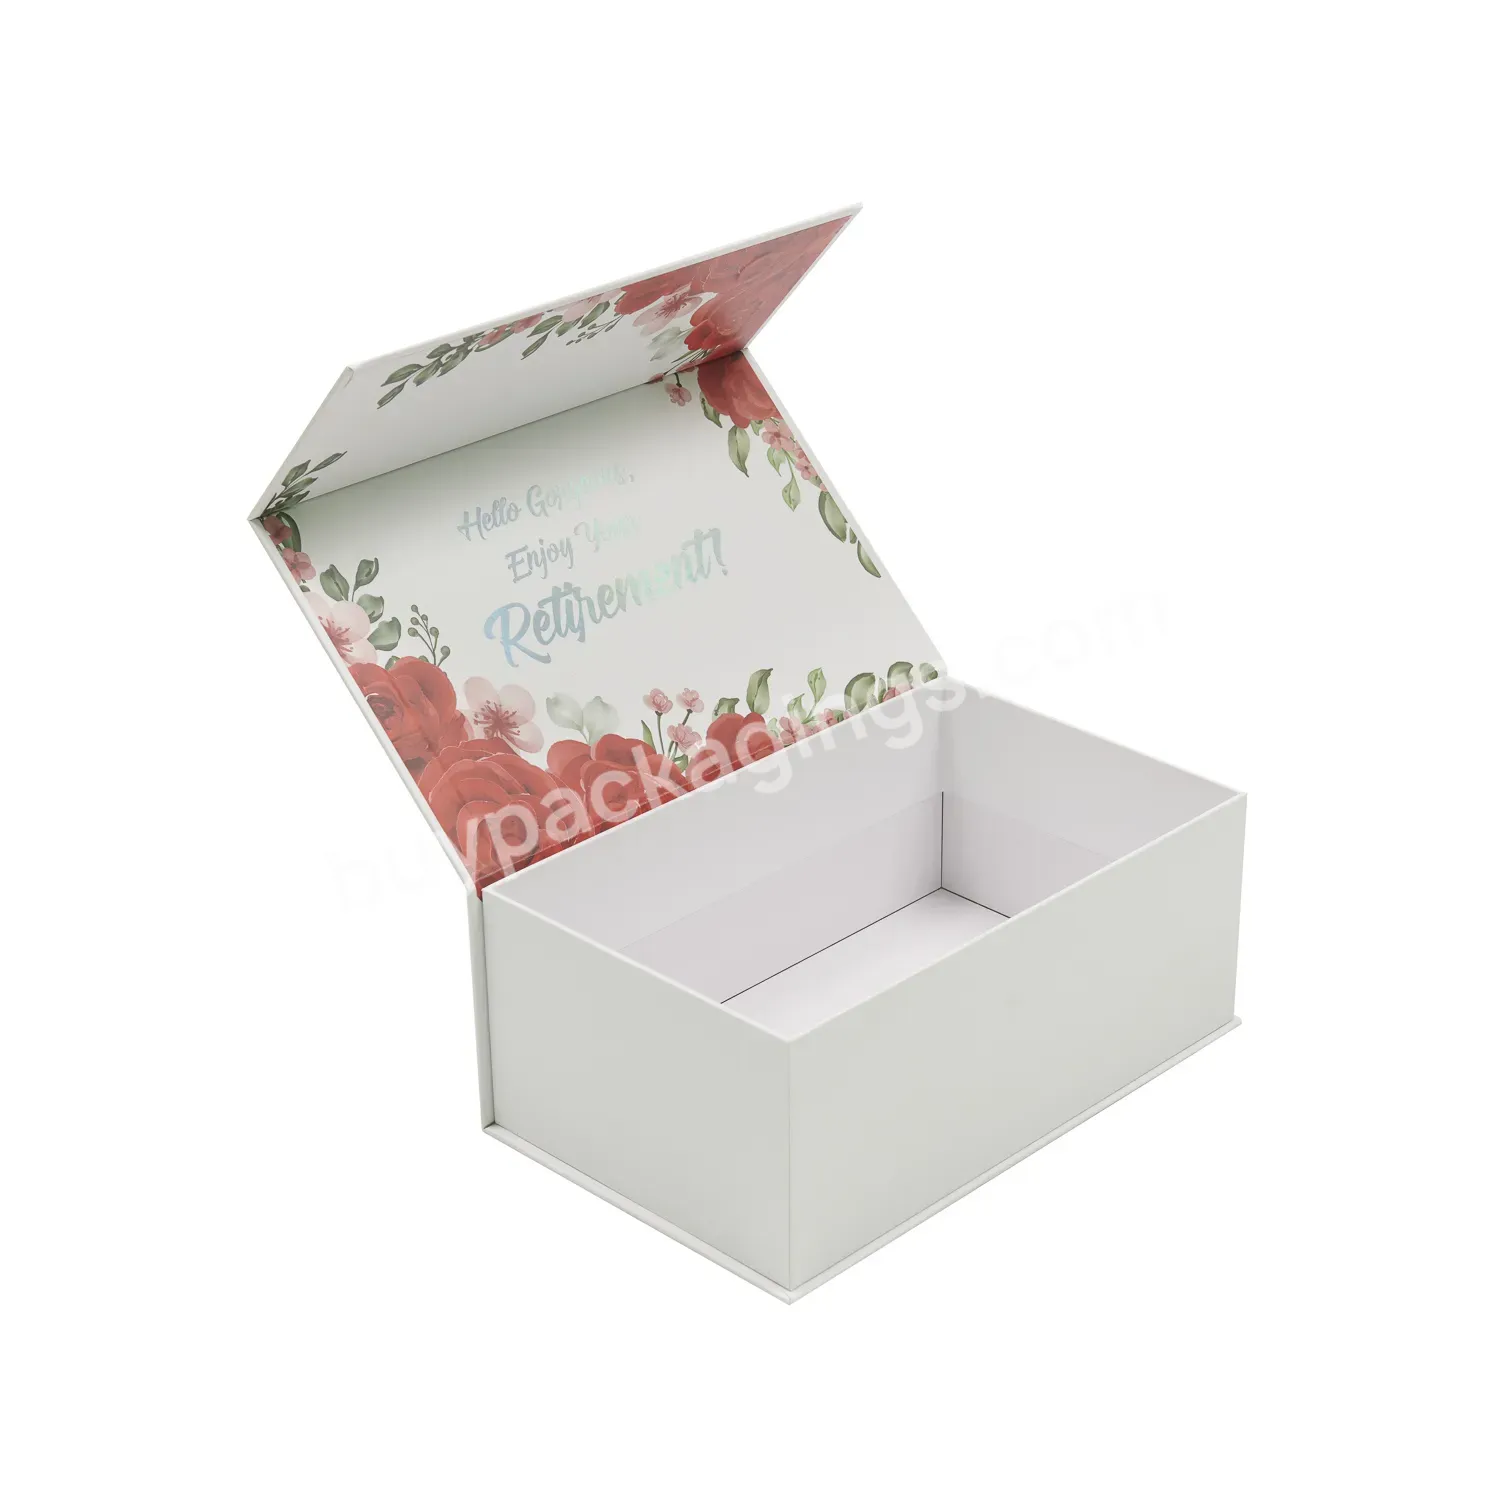 Luxury White Perfume Box Cosmetic Cardboard Rigid Box White Gift Box With Magnetic With Epe Foam Insert - Buy White Perfume Box,Perfume Box,Perfume Box White.